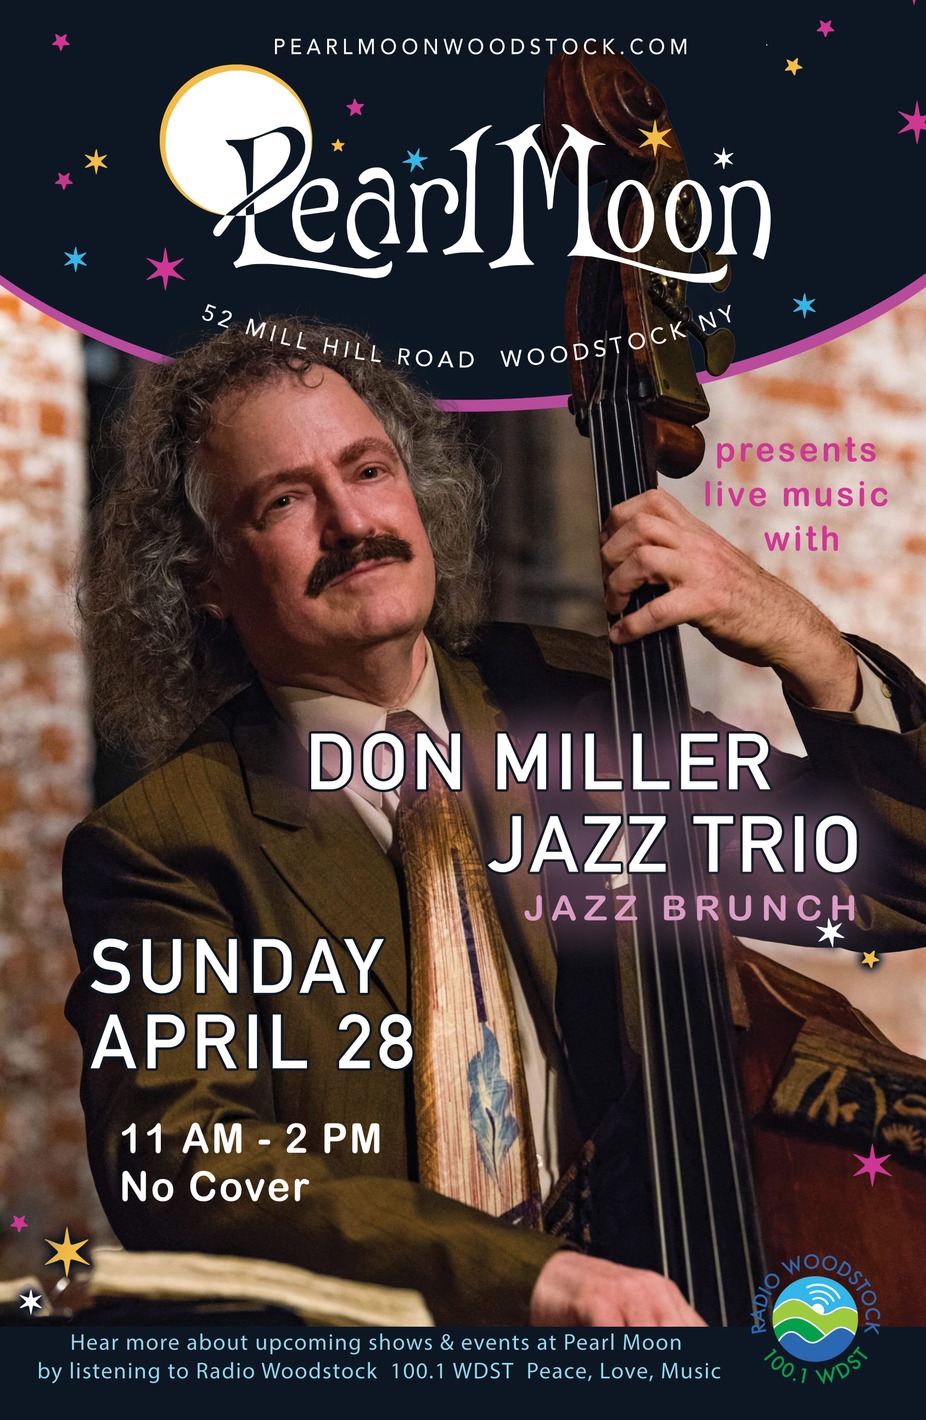 JAZZ BRUNCH with THE DON MILLER JAZZ TRIO at PEARL MOON WOODSTOCK event photo